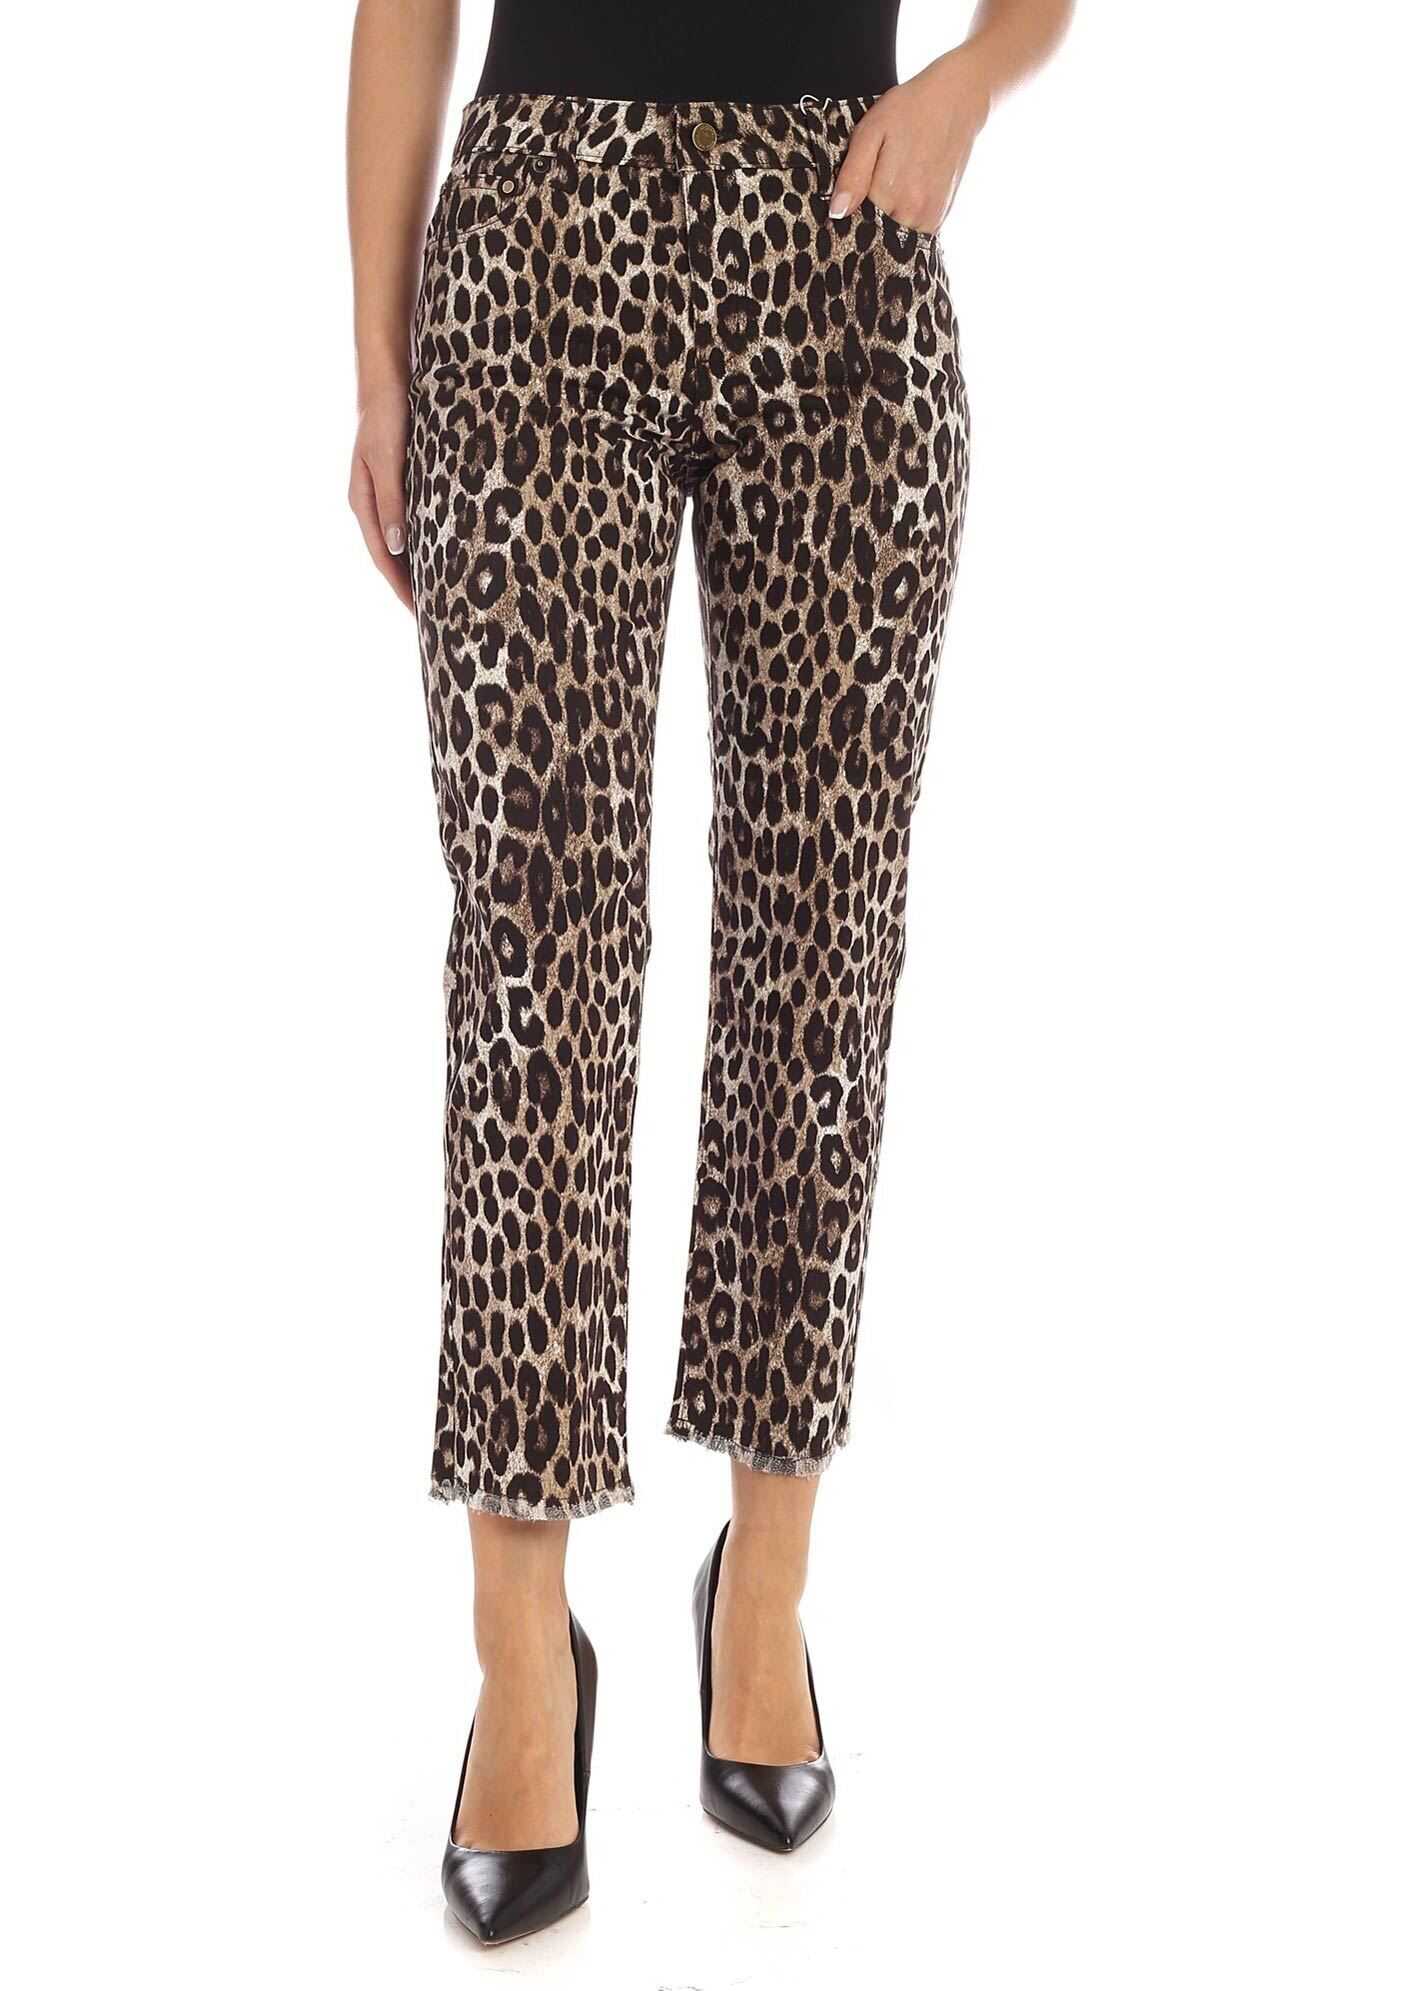 Michael Kors Animal Print Trousers In Shades Of Brown And Black* Animal print